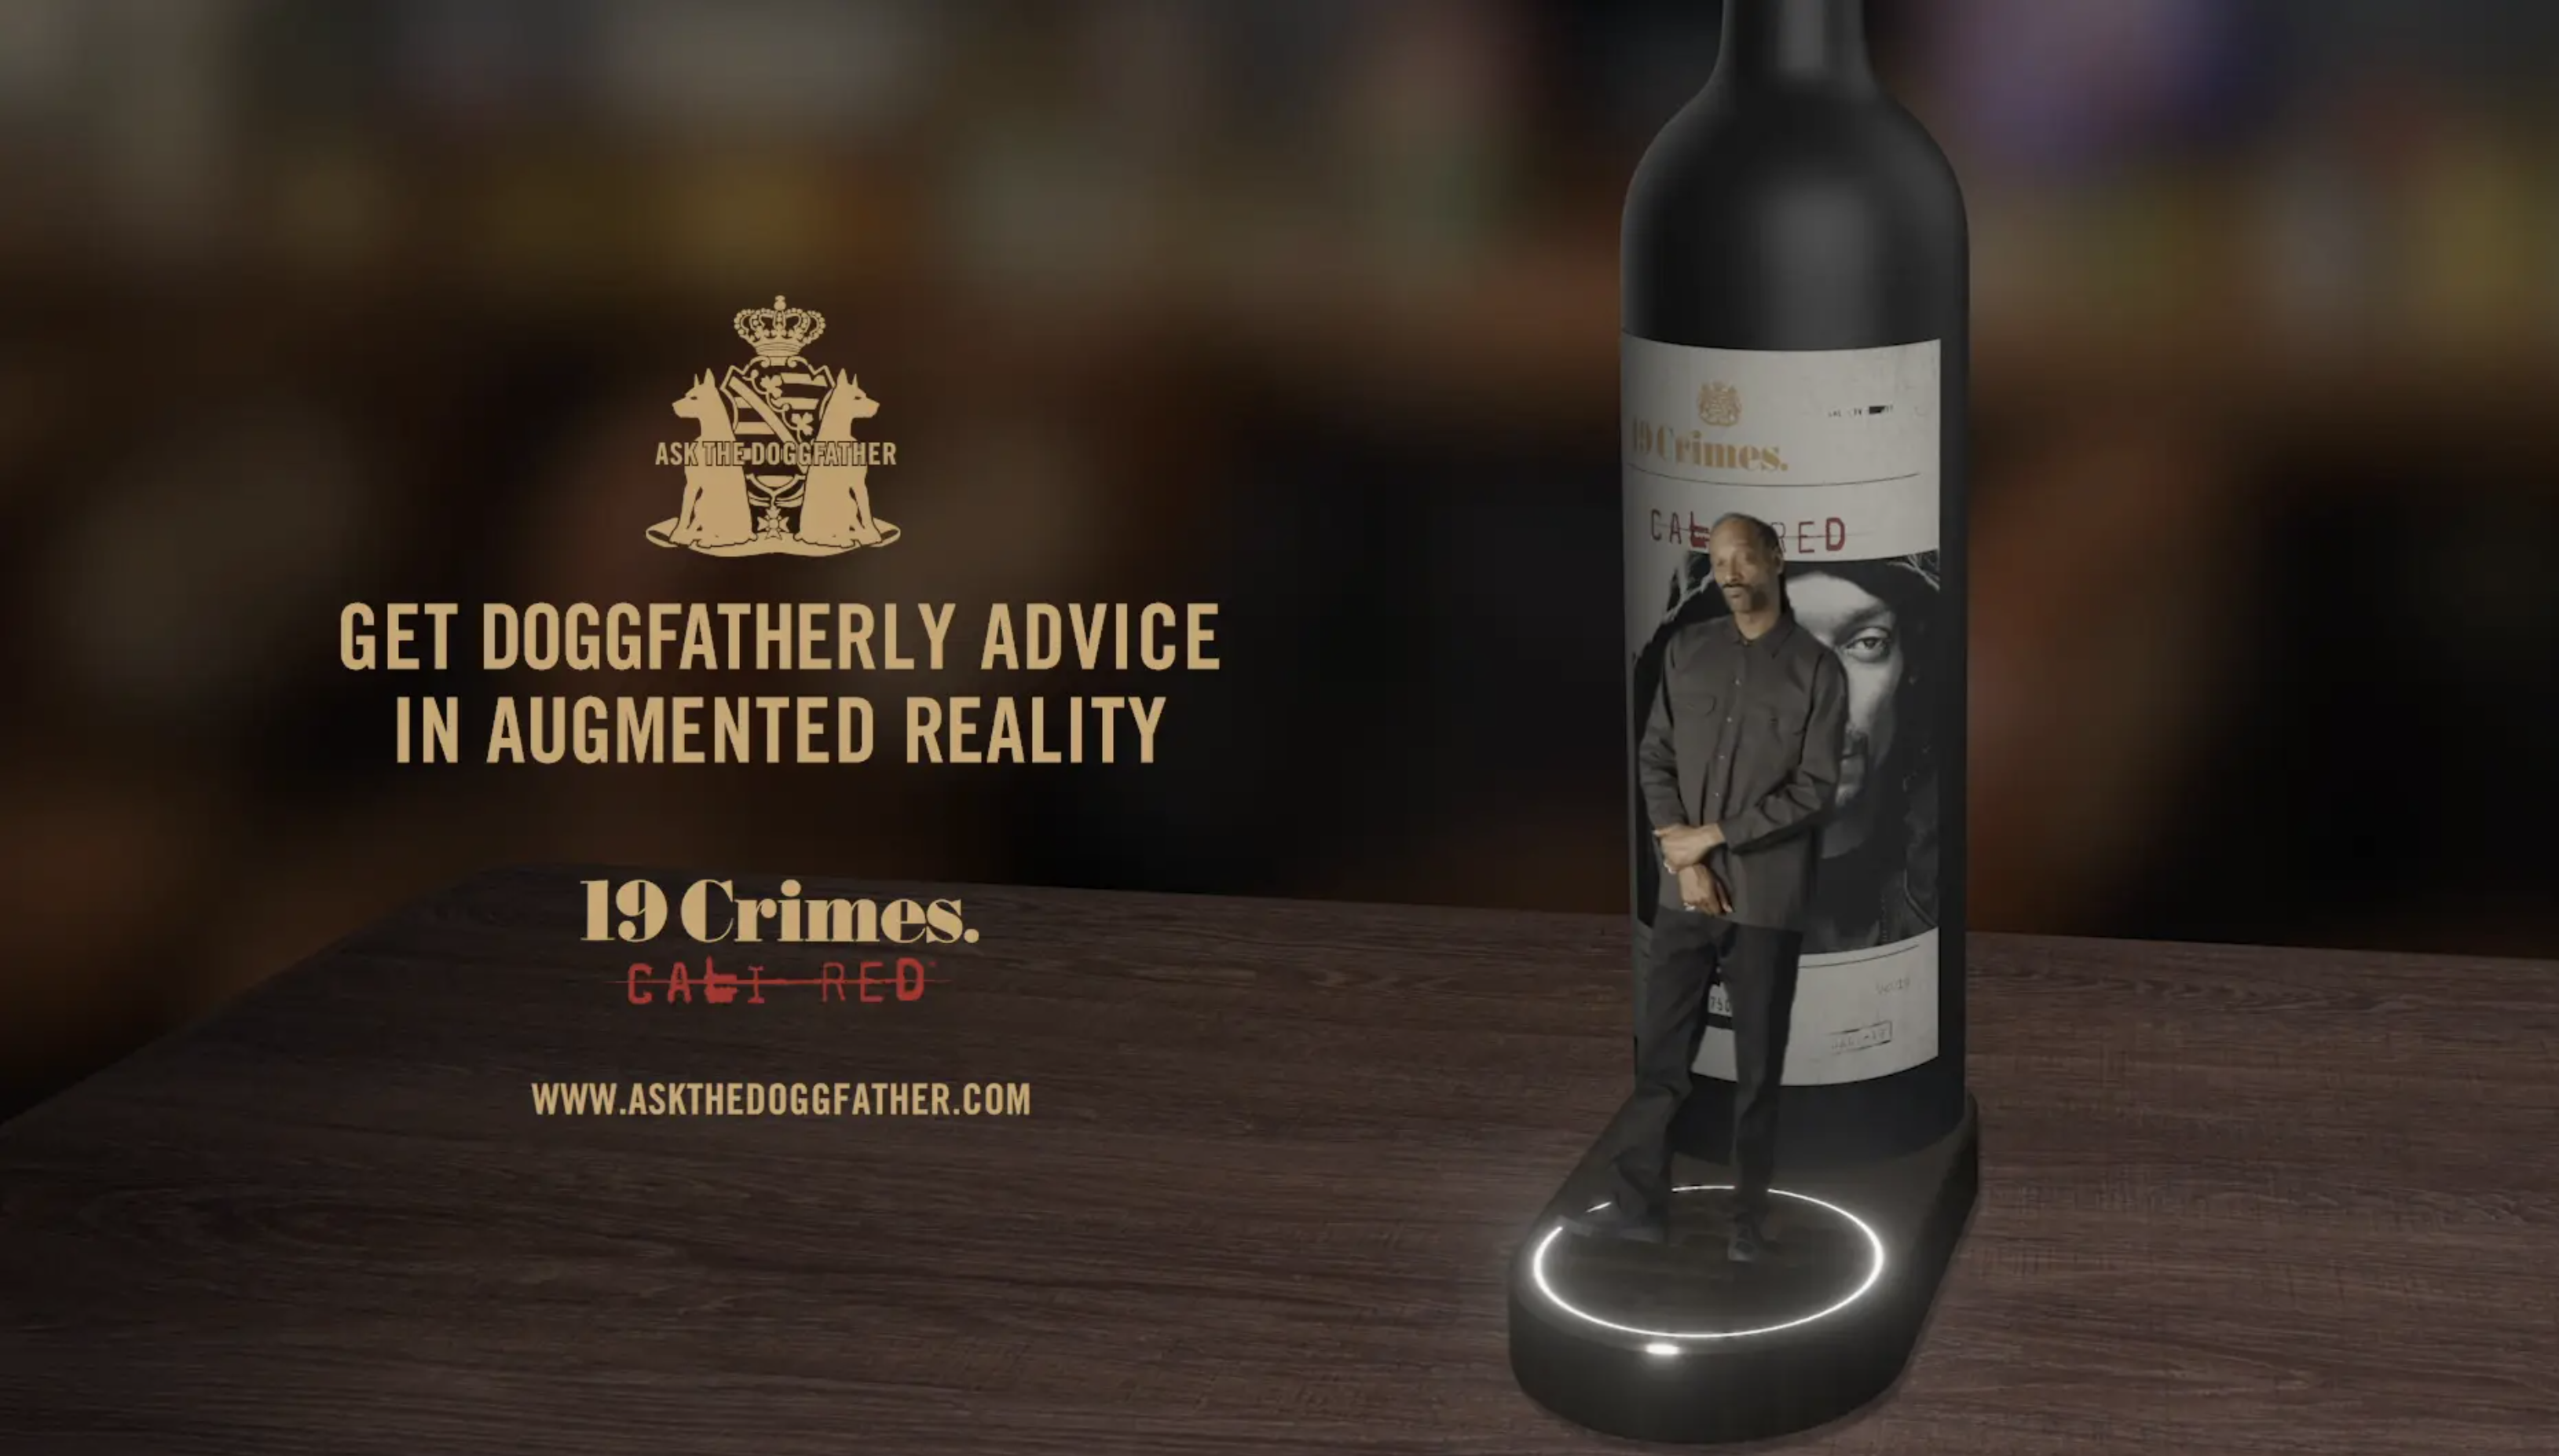 19 Crimes Snoop Cali Red lets you ask a holographic Snoop Dog anything